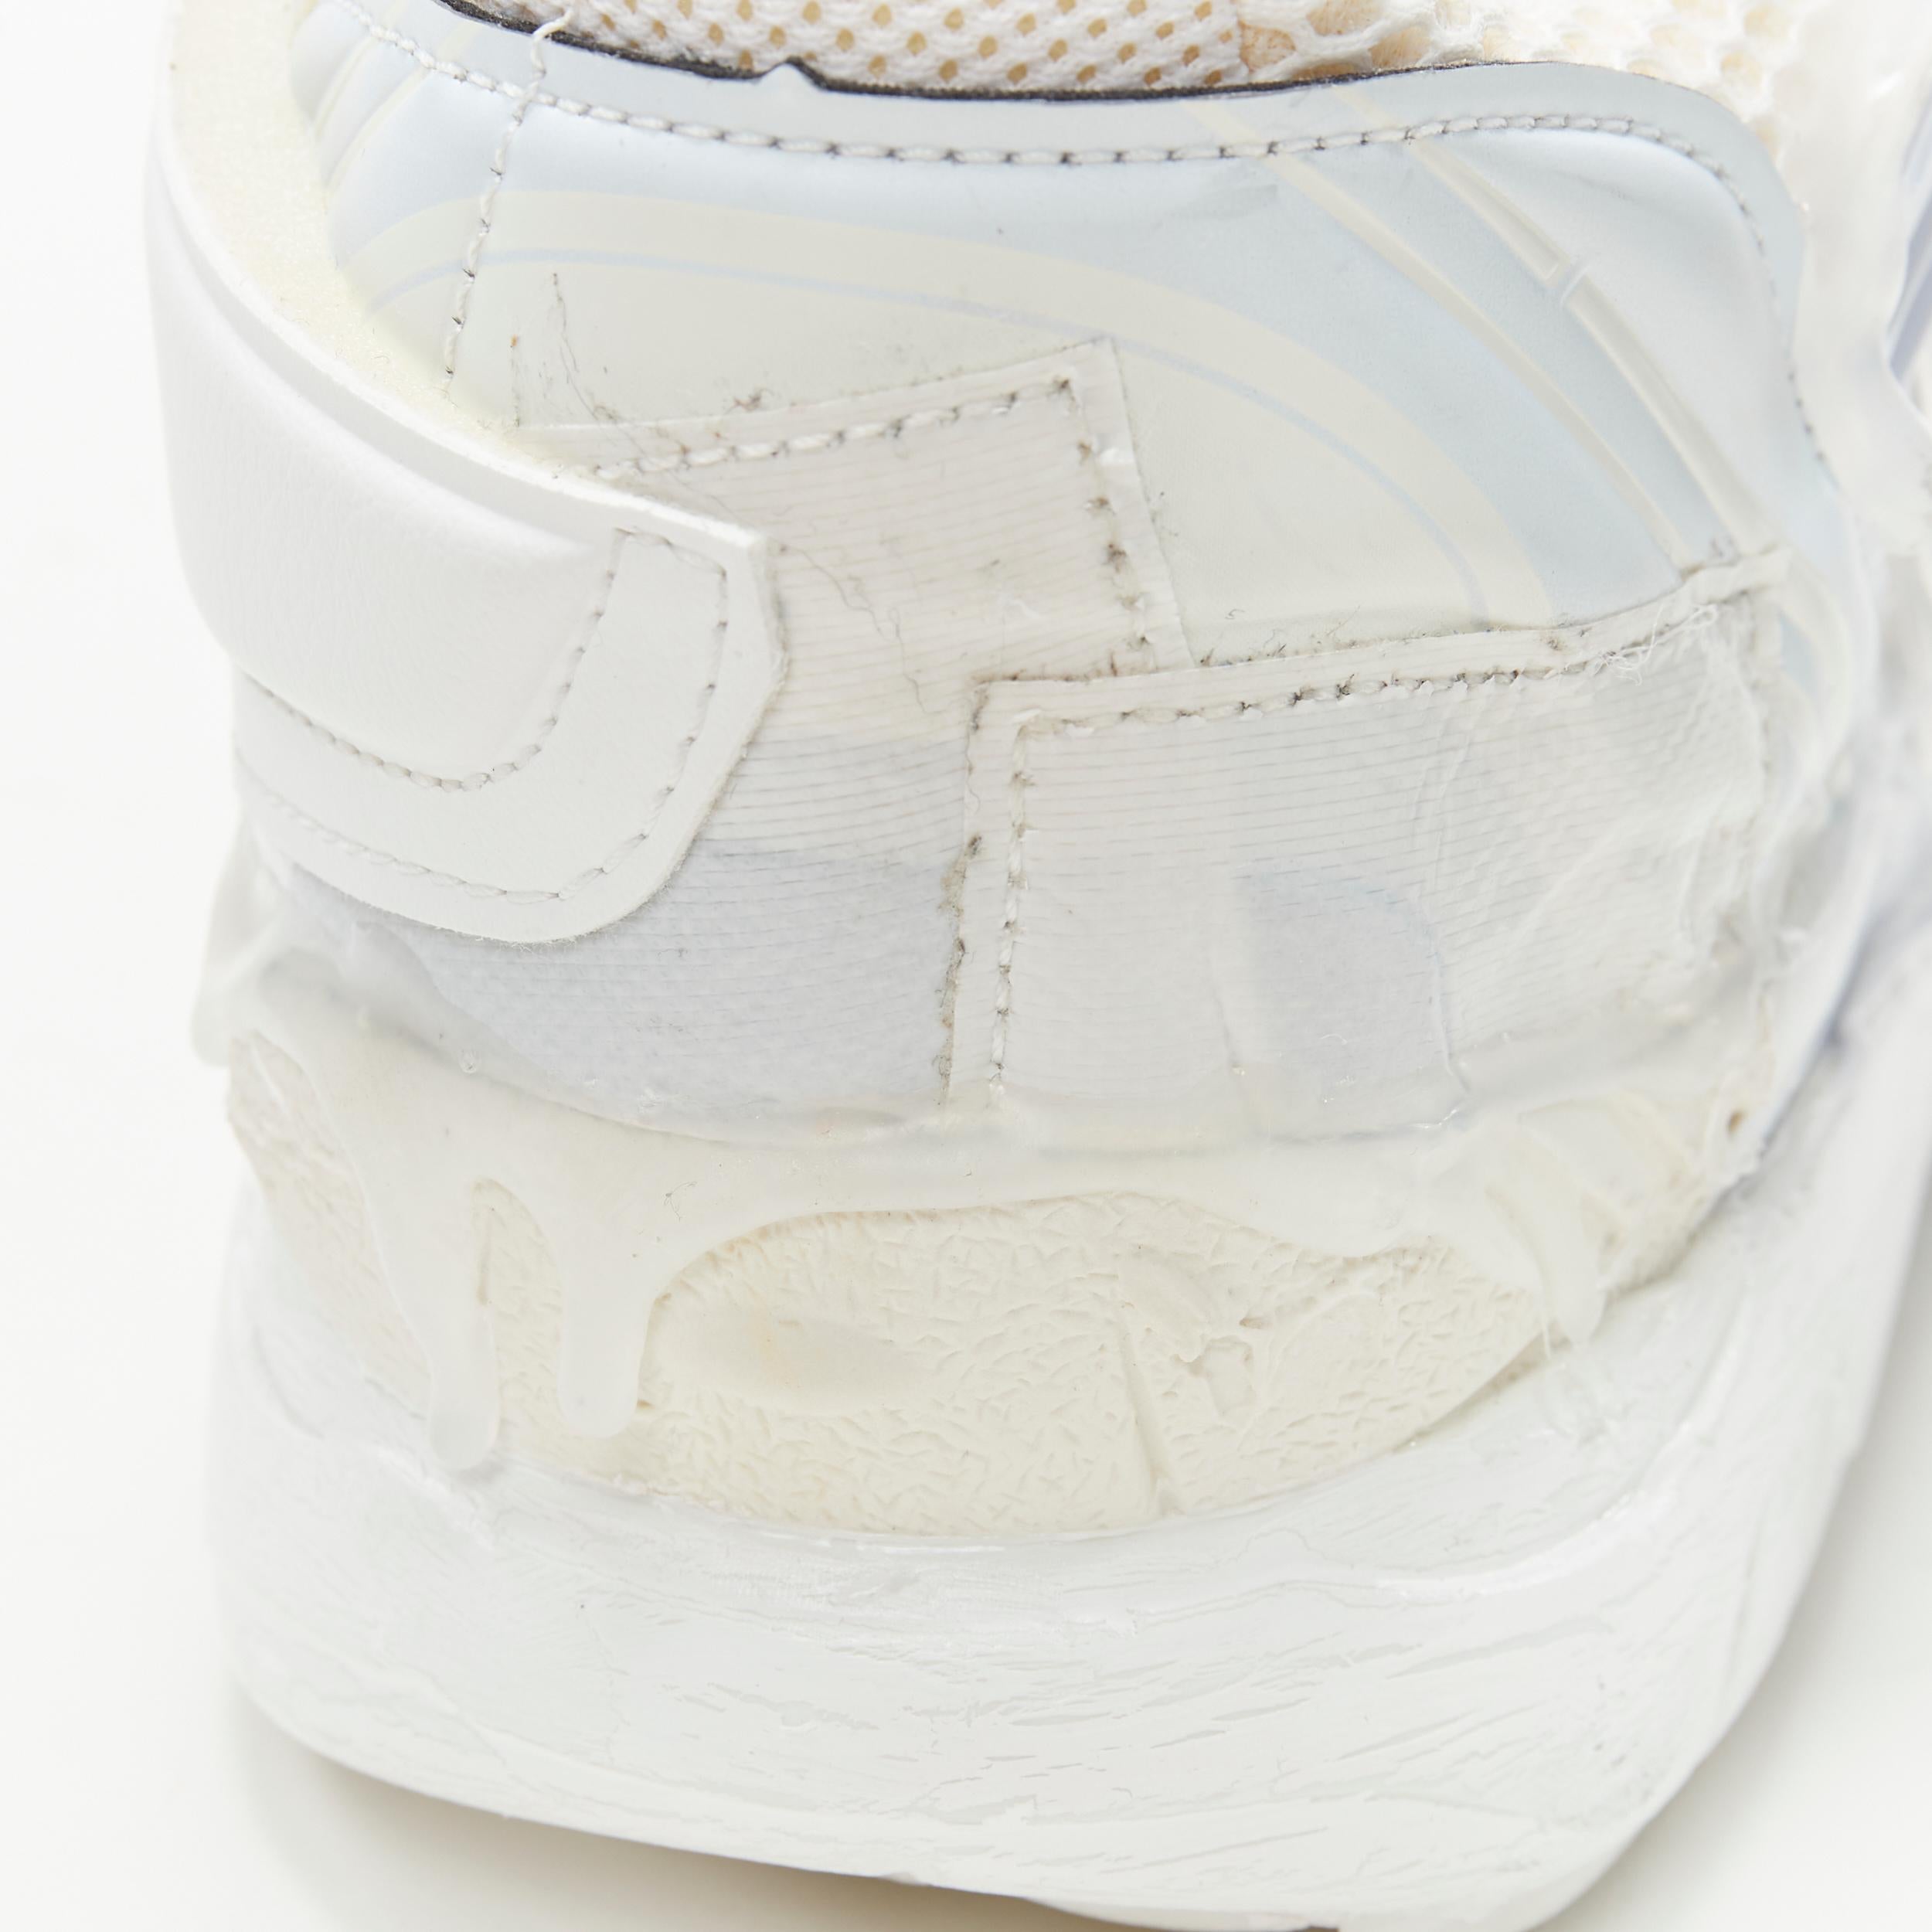 Women's new MAISON MARGIELA Fusion white deconstructed glue covered low top sneaker EU39